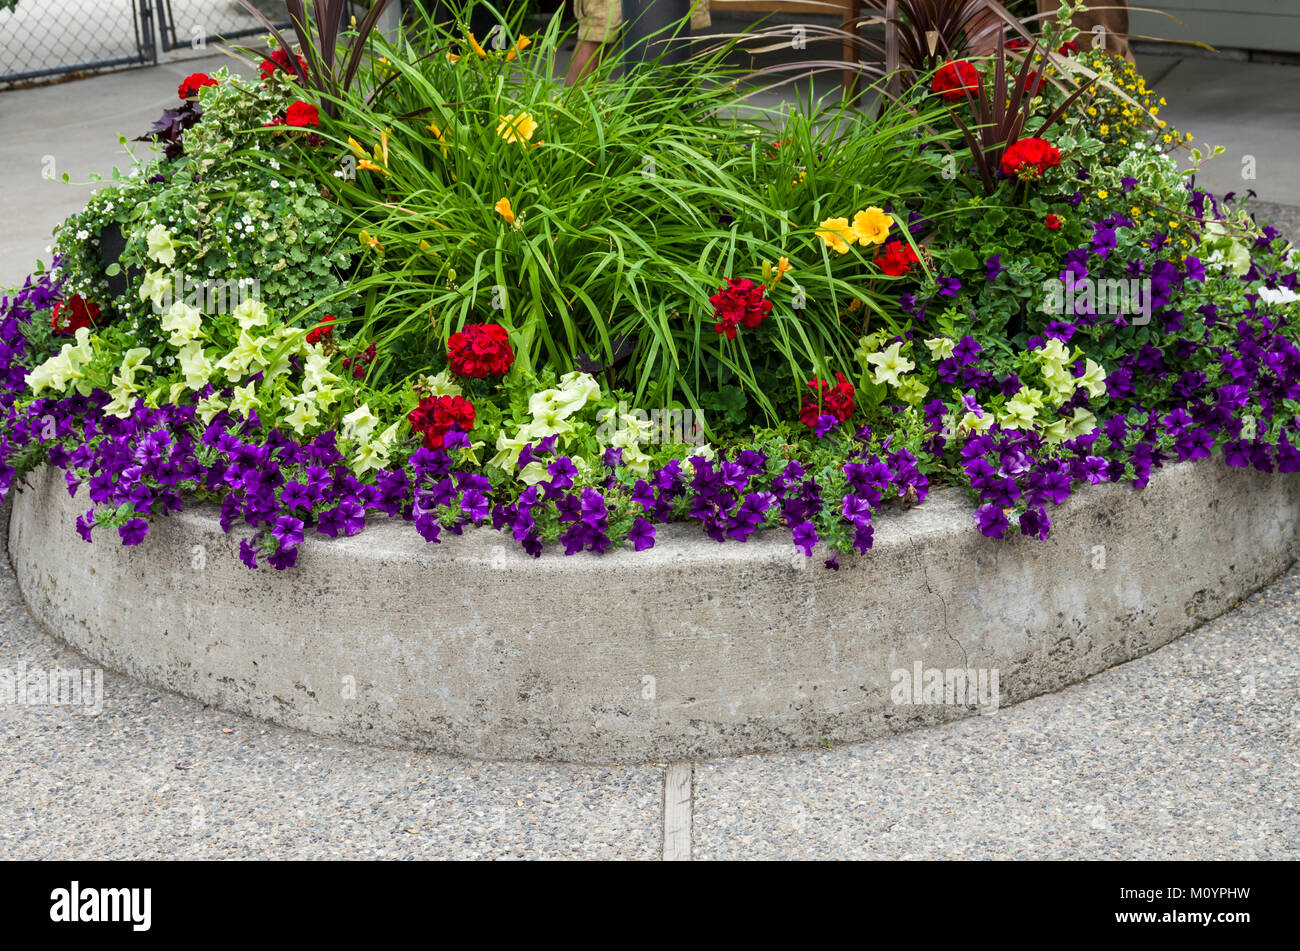 Red white and blue flowers in a landscape planter Stock Photo